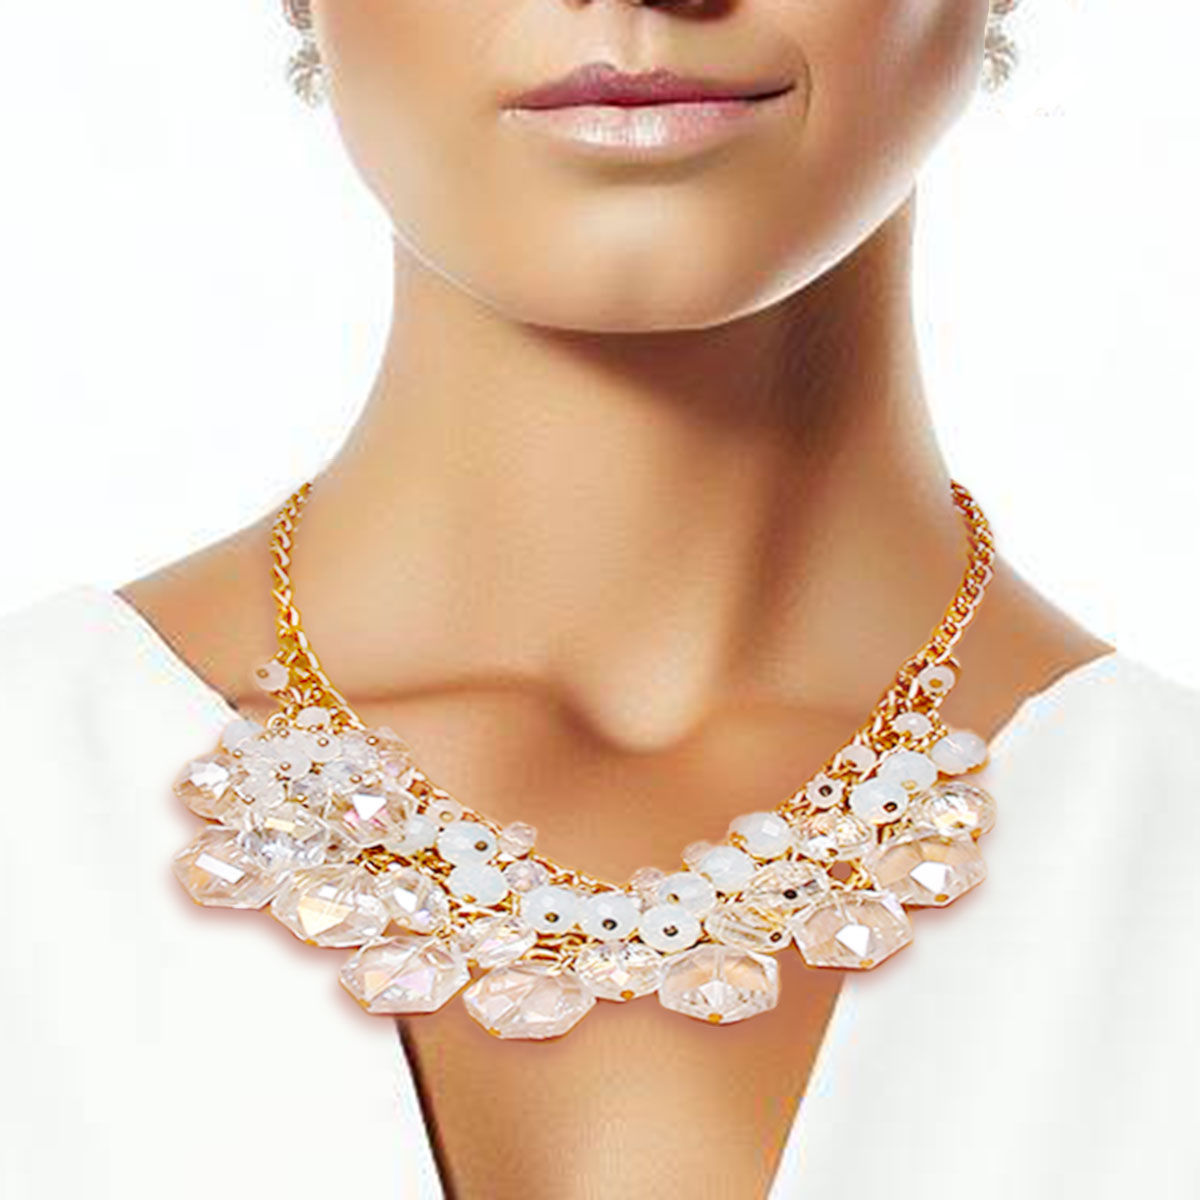 Clustered Bead Necklace Set